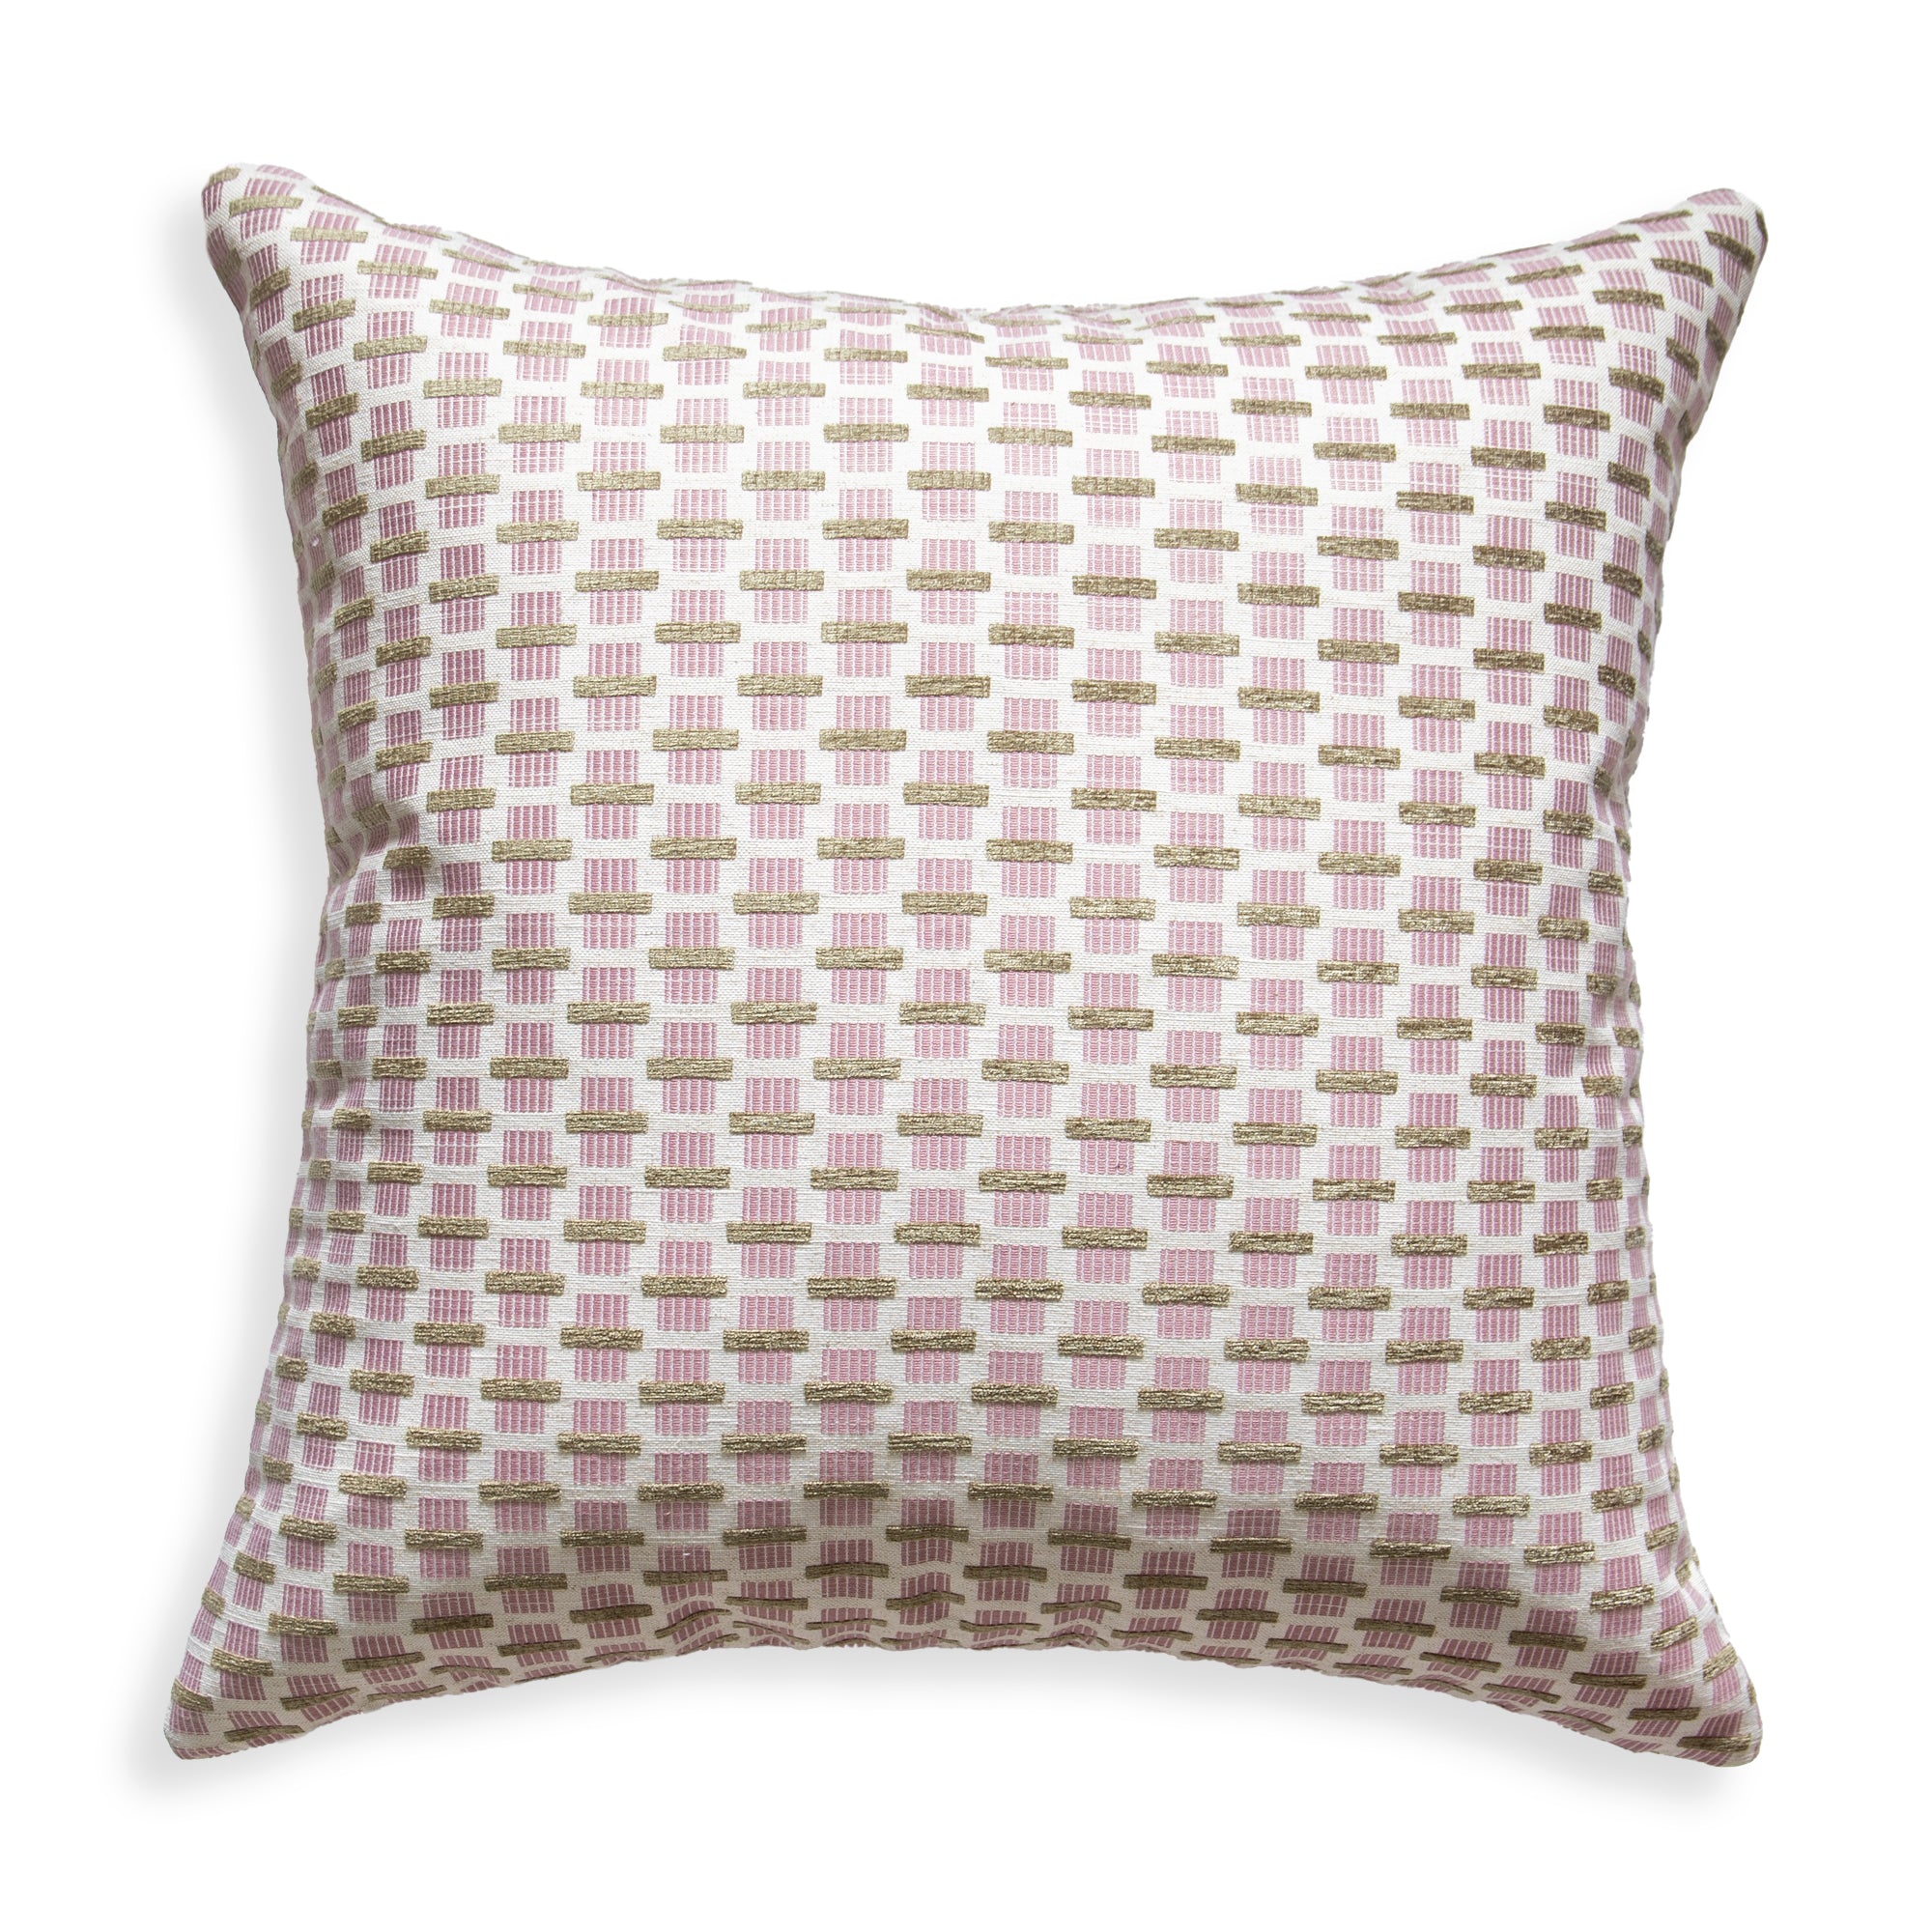  chenille and woven jacquard pink and citron geometricpillow